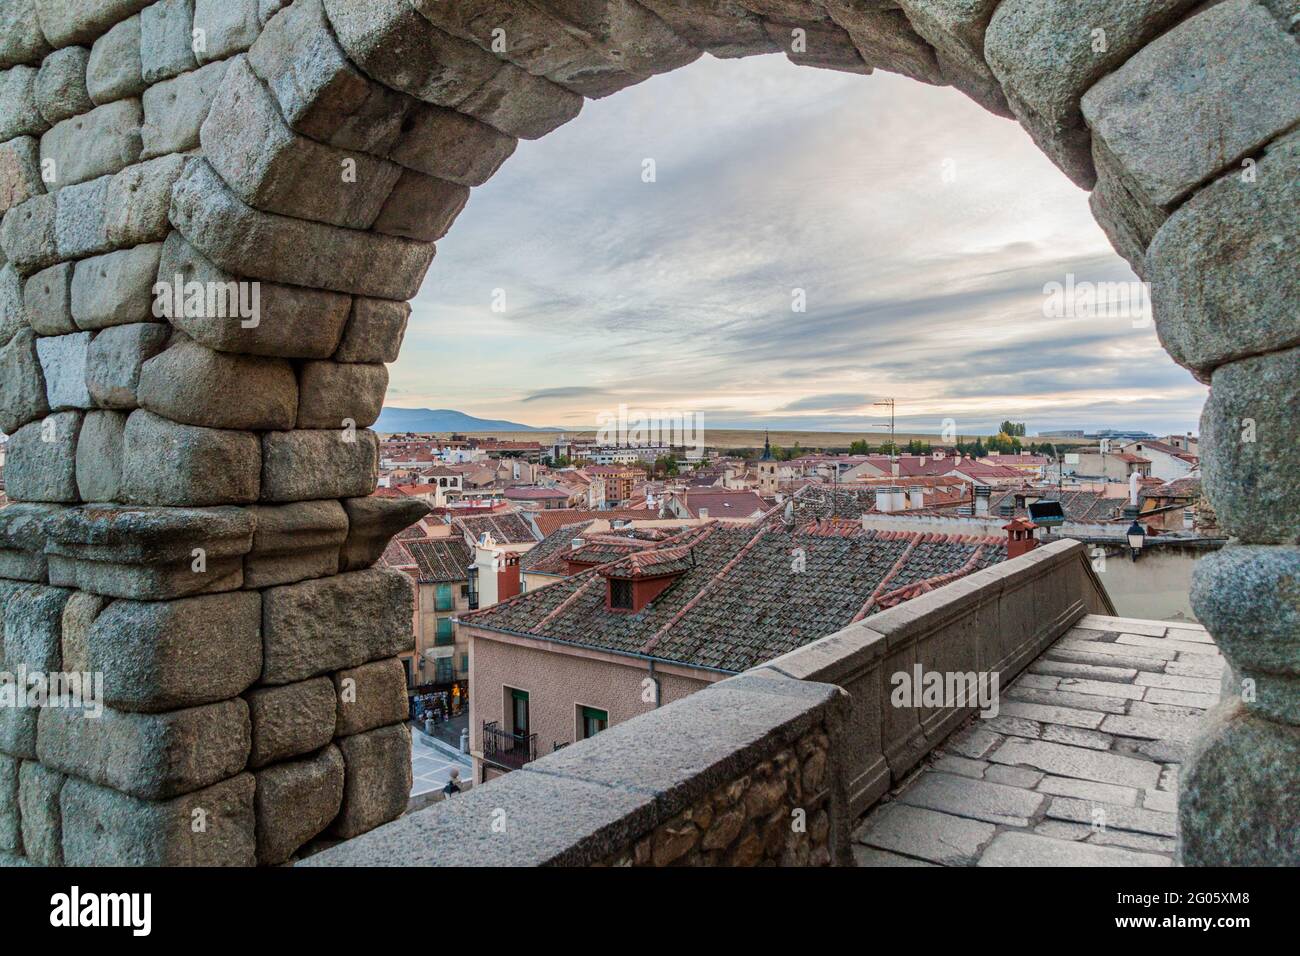 View of the old town from the Roman Aqueduct in Segovia, Spain Stock Photo